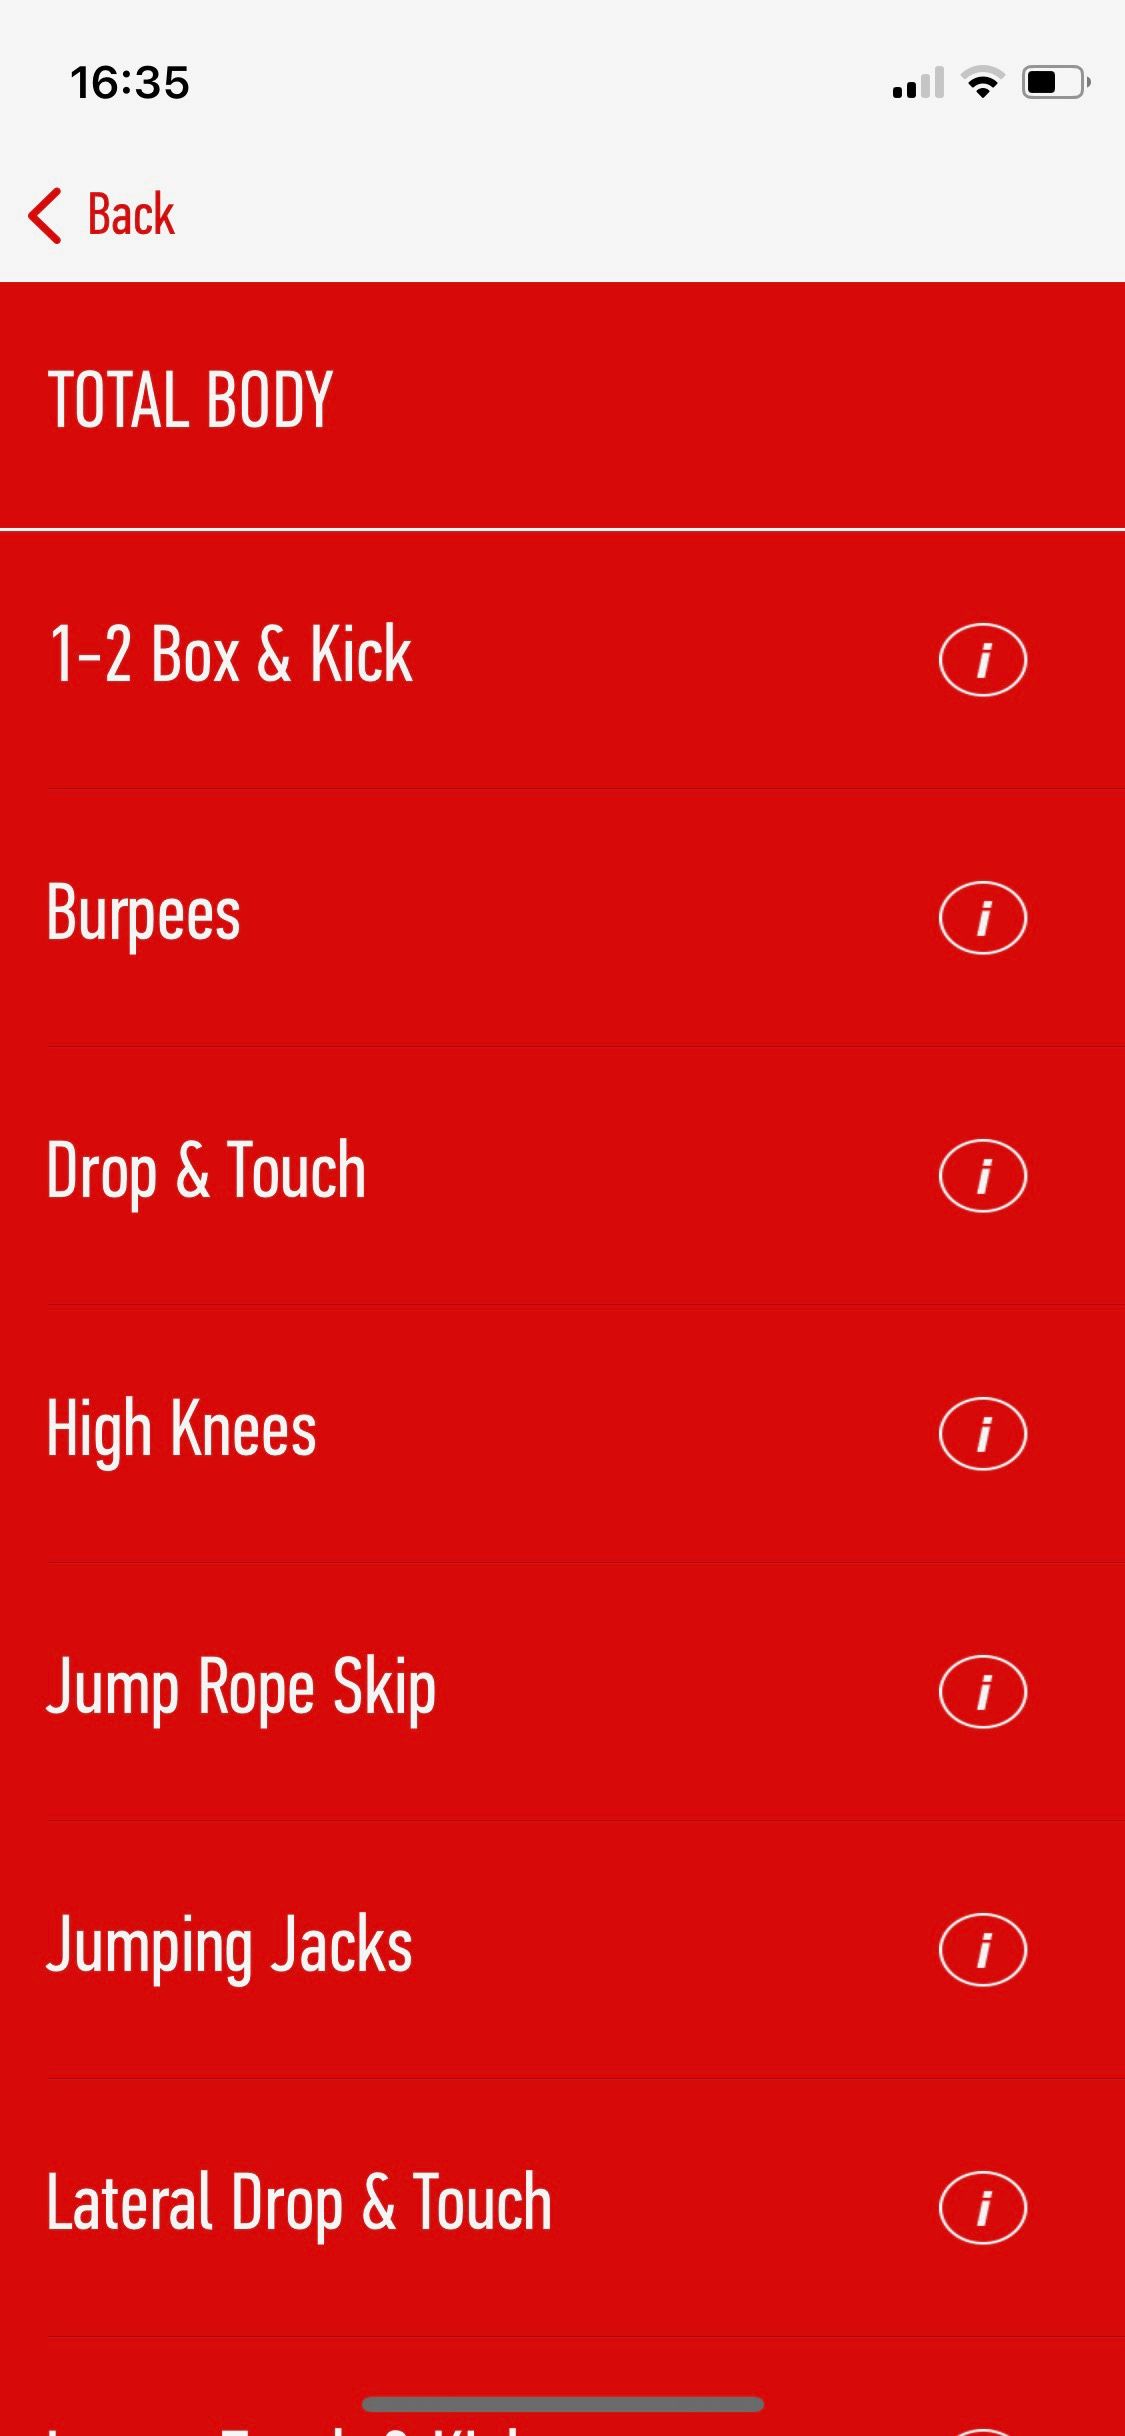 Screenshot of J&J 7 minute app showing example of an exercise routine